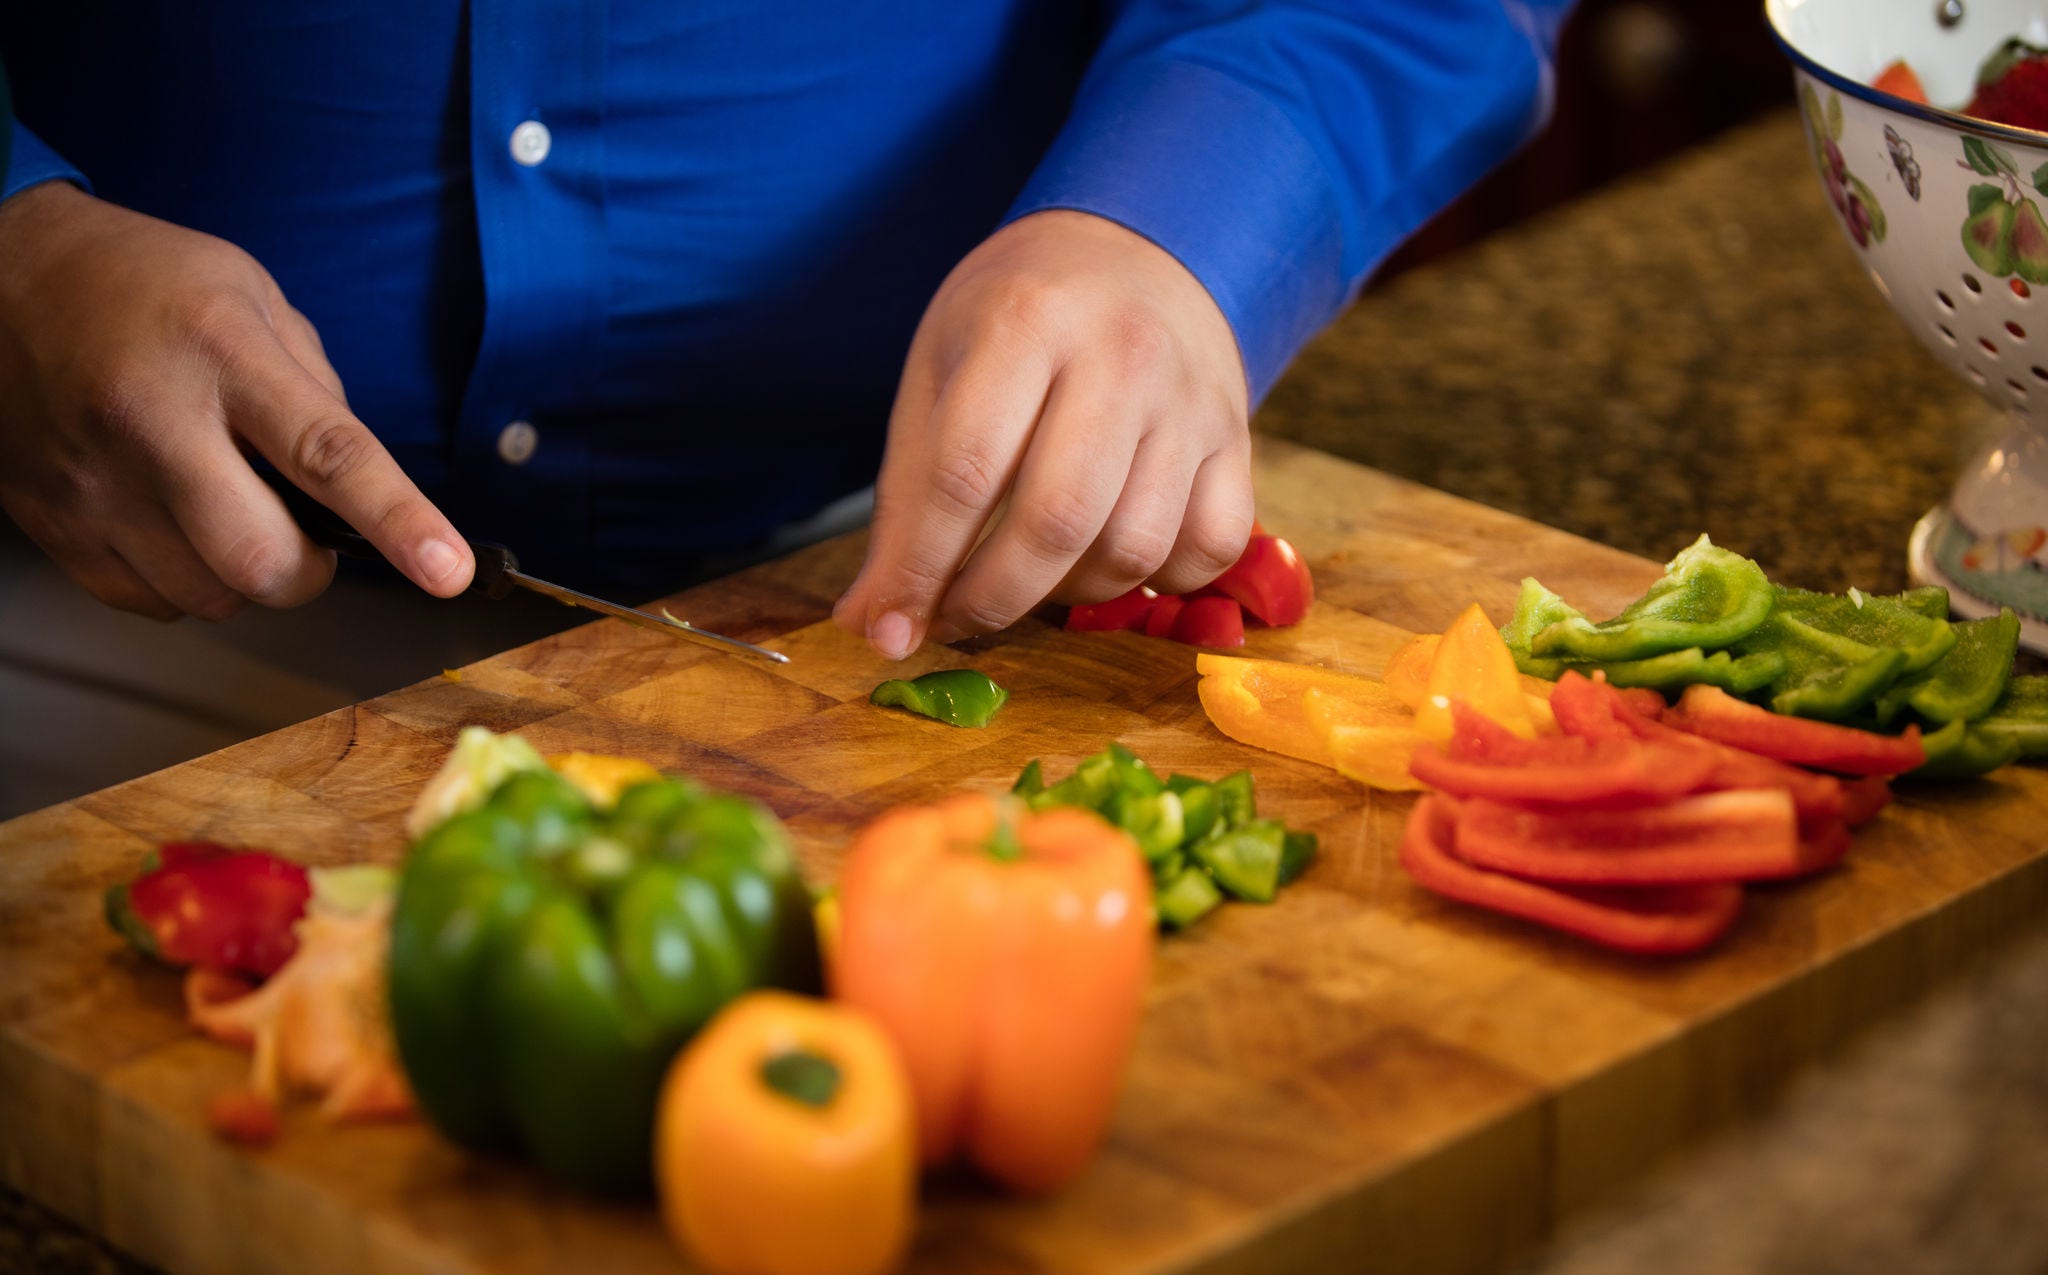 Hands cutting red, yellow, green peppers